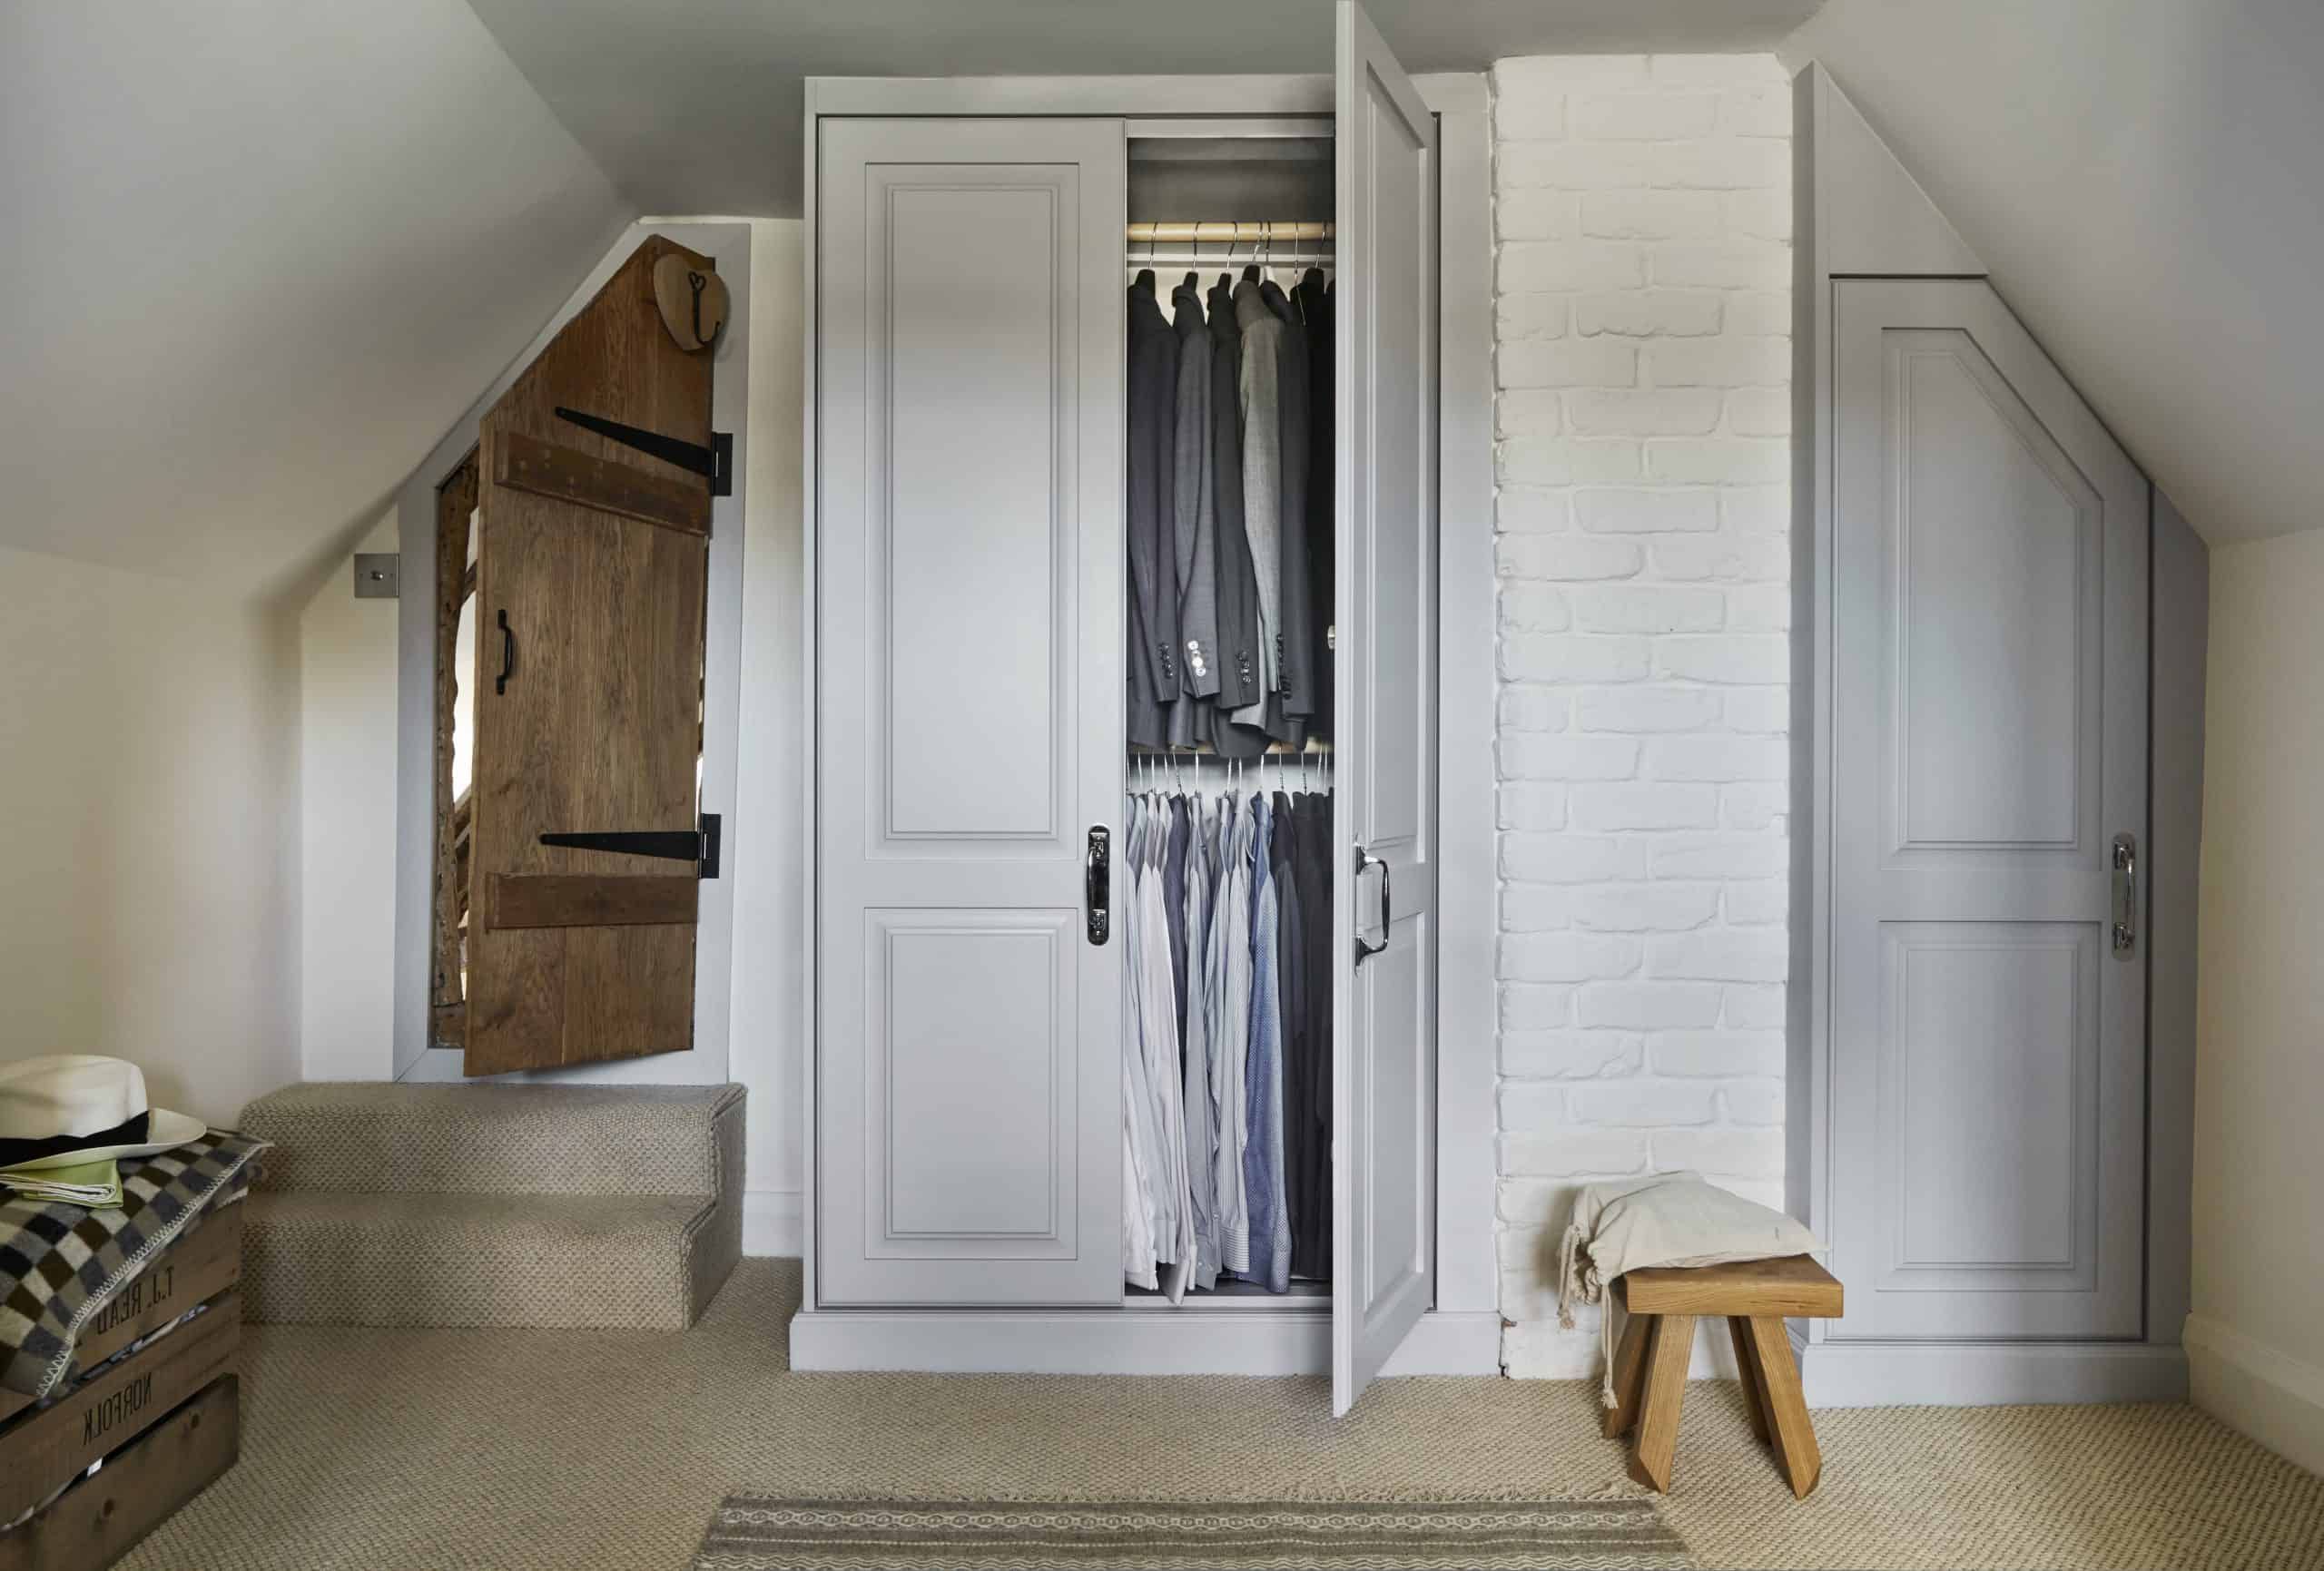 Grace In A Small Space: Small Bedroom Ideas | John Lewis Of Hungerford Within Small Wardrobes (View 10 of 20)